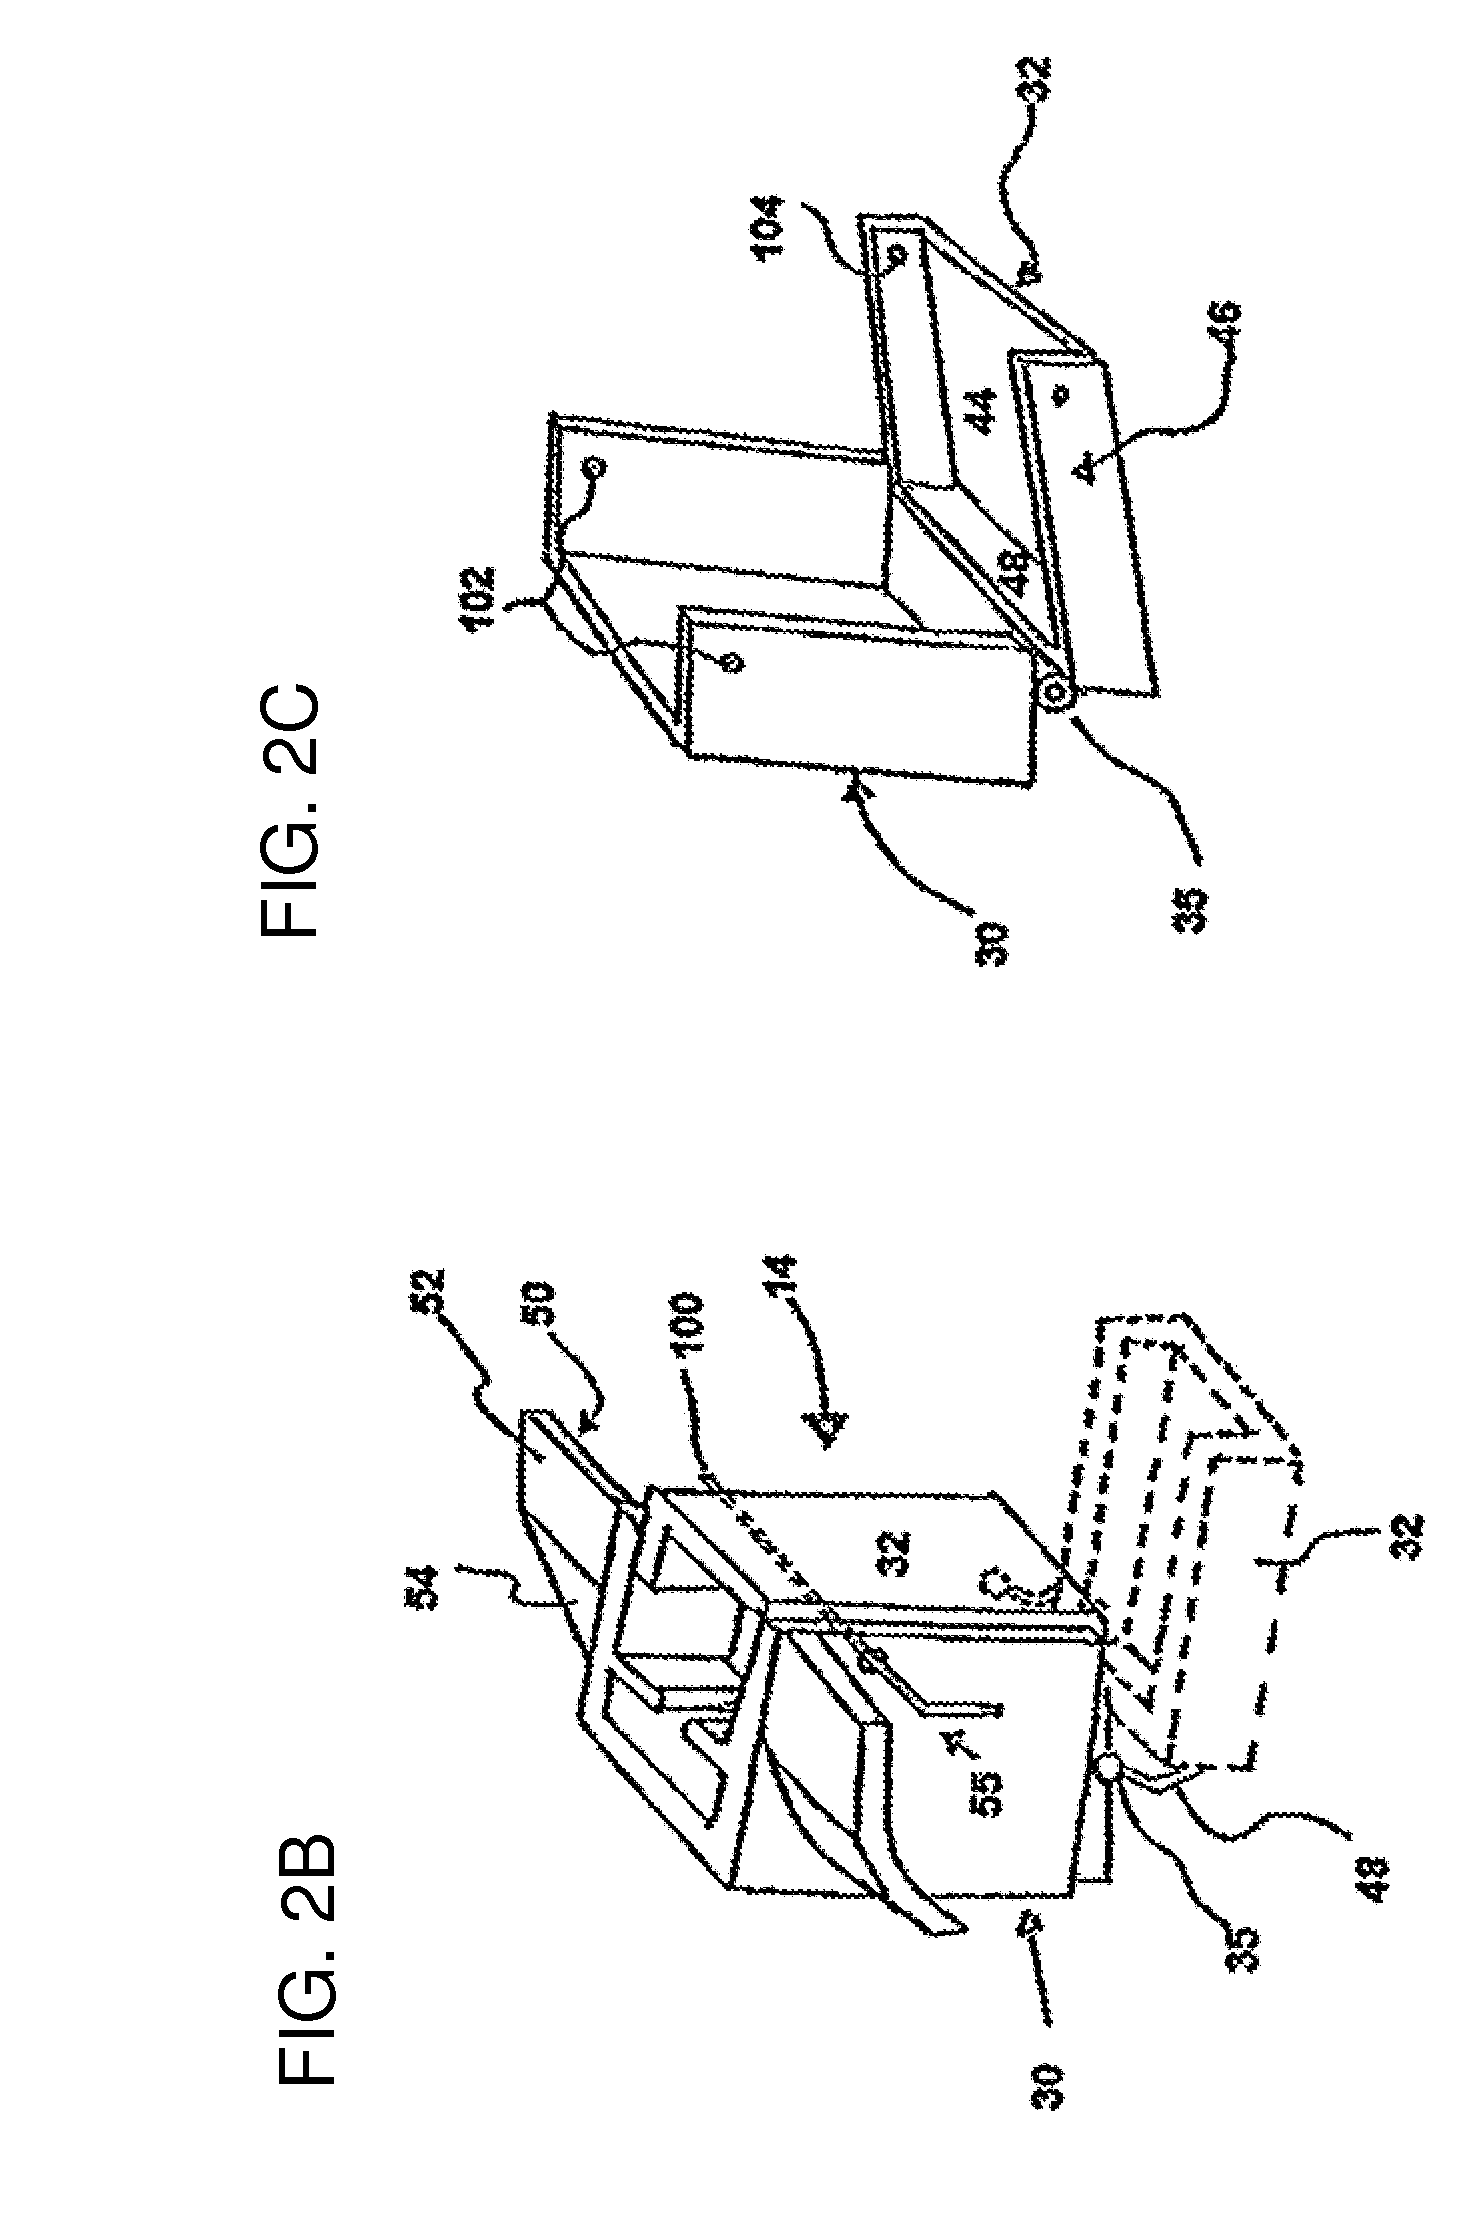 Sidewall panel and tarpaulin cover system for flat bed trailers, and truck trailer incorporating same